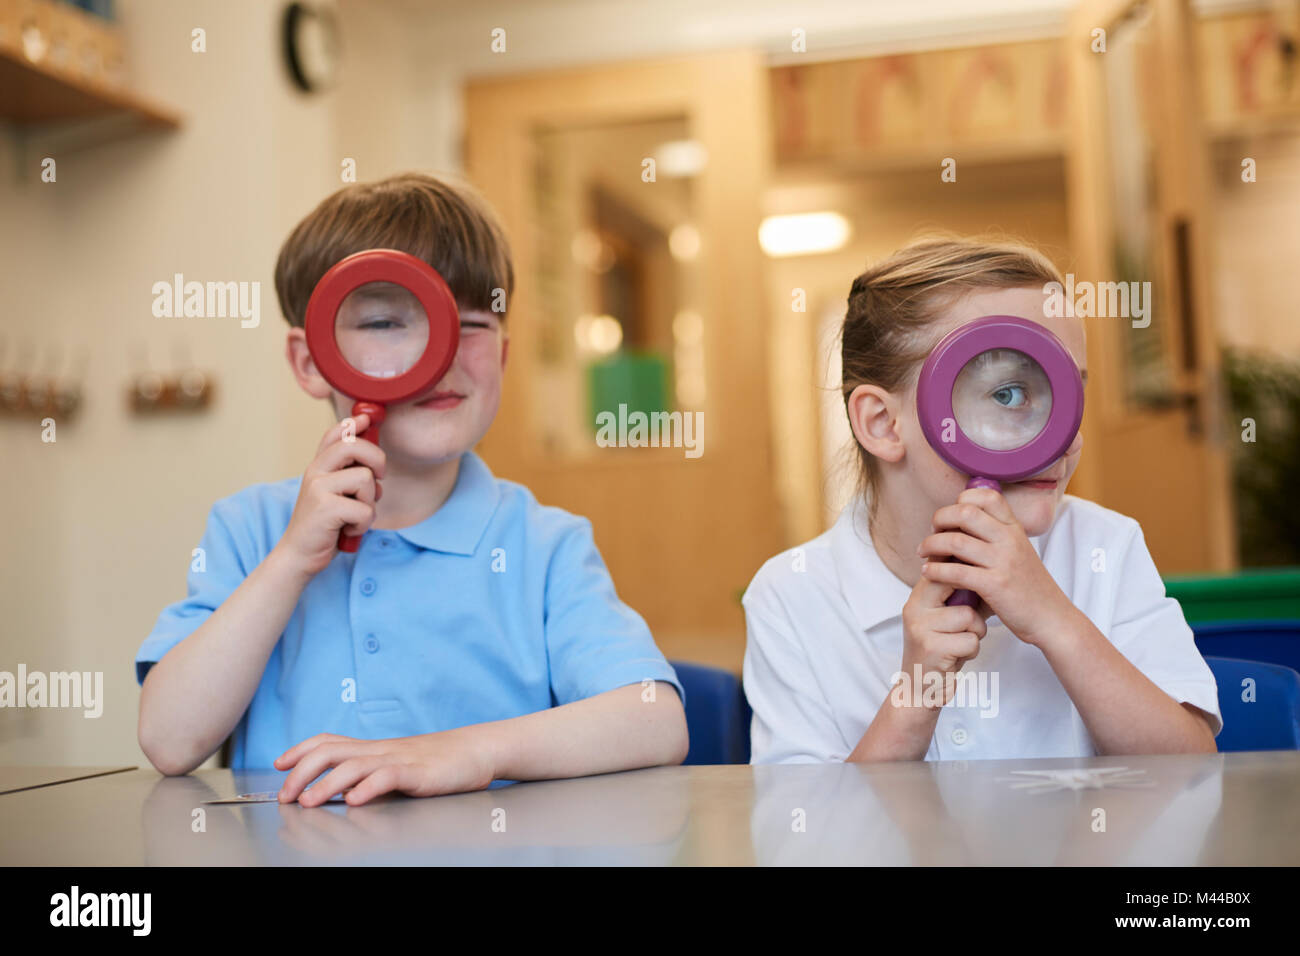 Schoolboy and girl looking through magnifying glasses in classroom at primary school, portrait Stock Photo